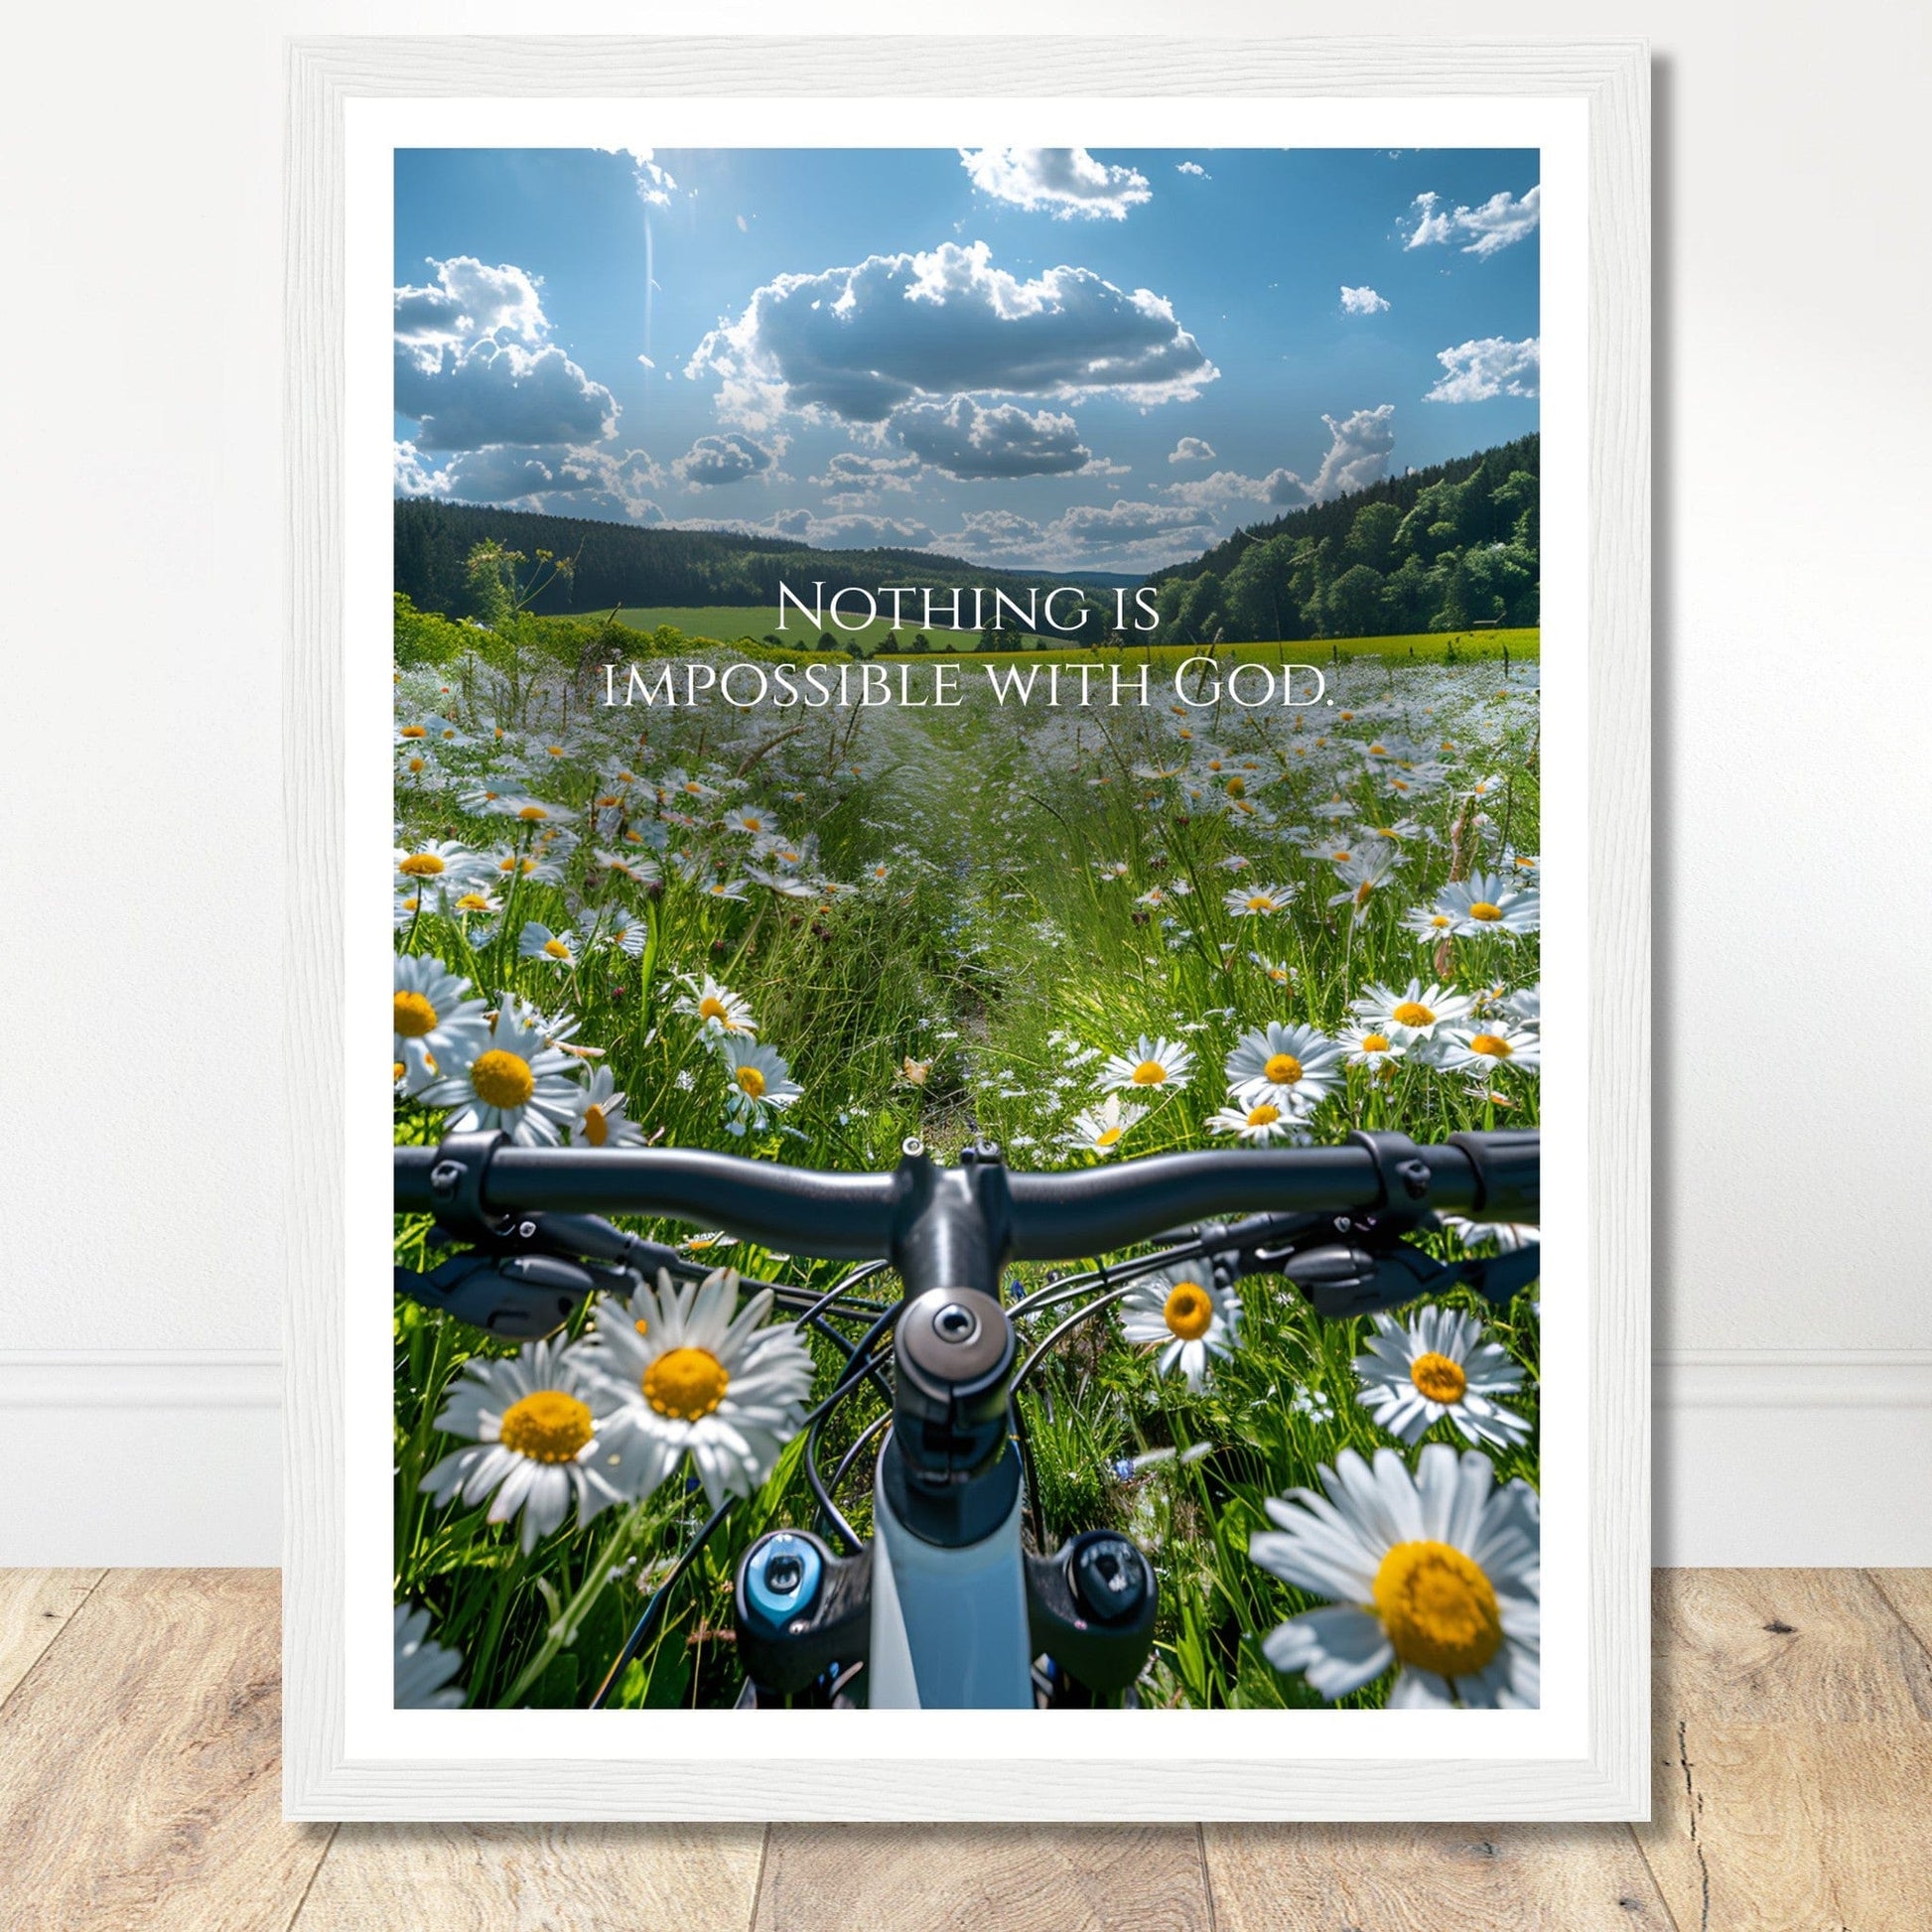 Coffee With My Father Print Material 30x40 cm / 12x16″ / Premium Matte Paper Wooden Framed Poster / White frame Nothing is Impossible With God - Artwork